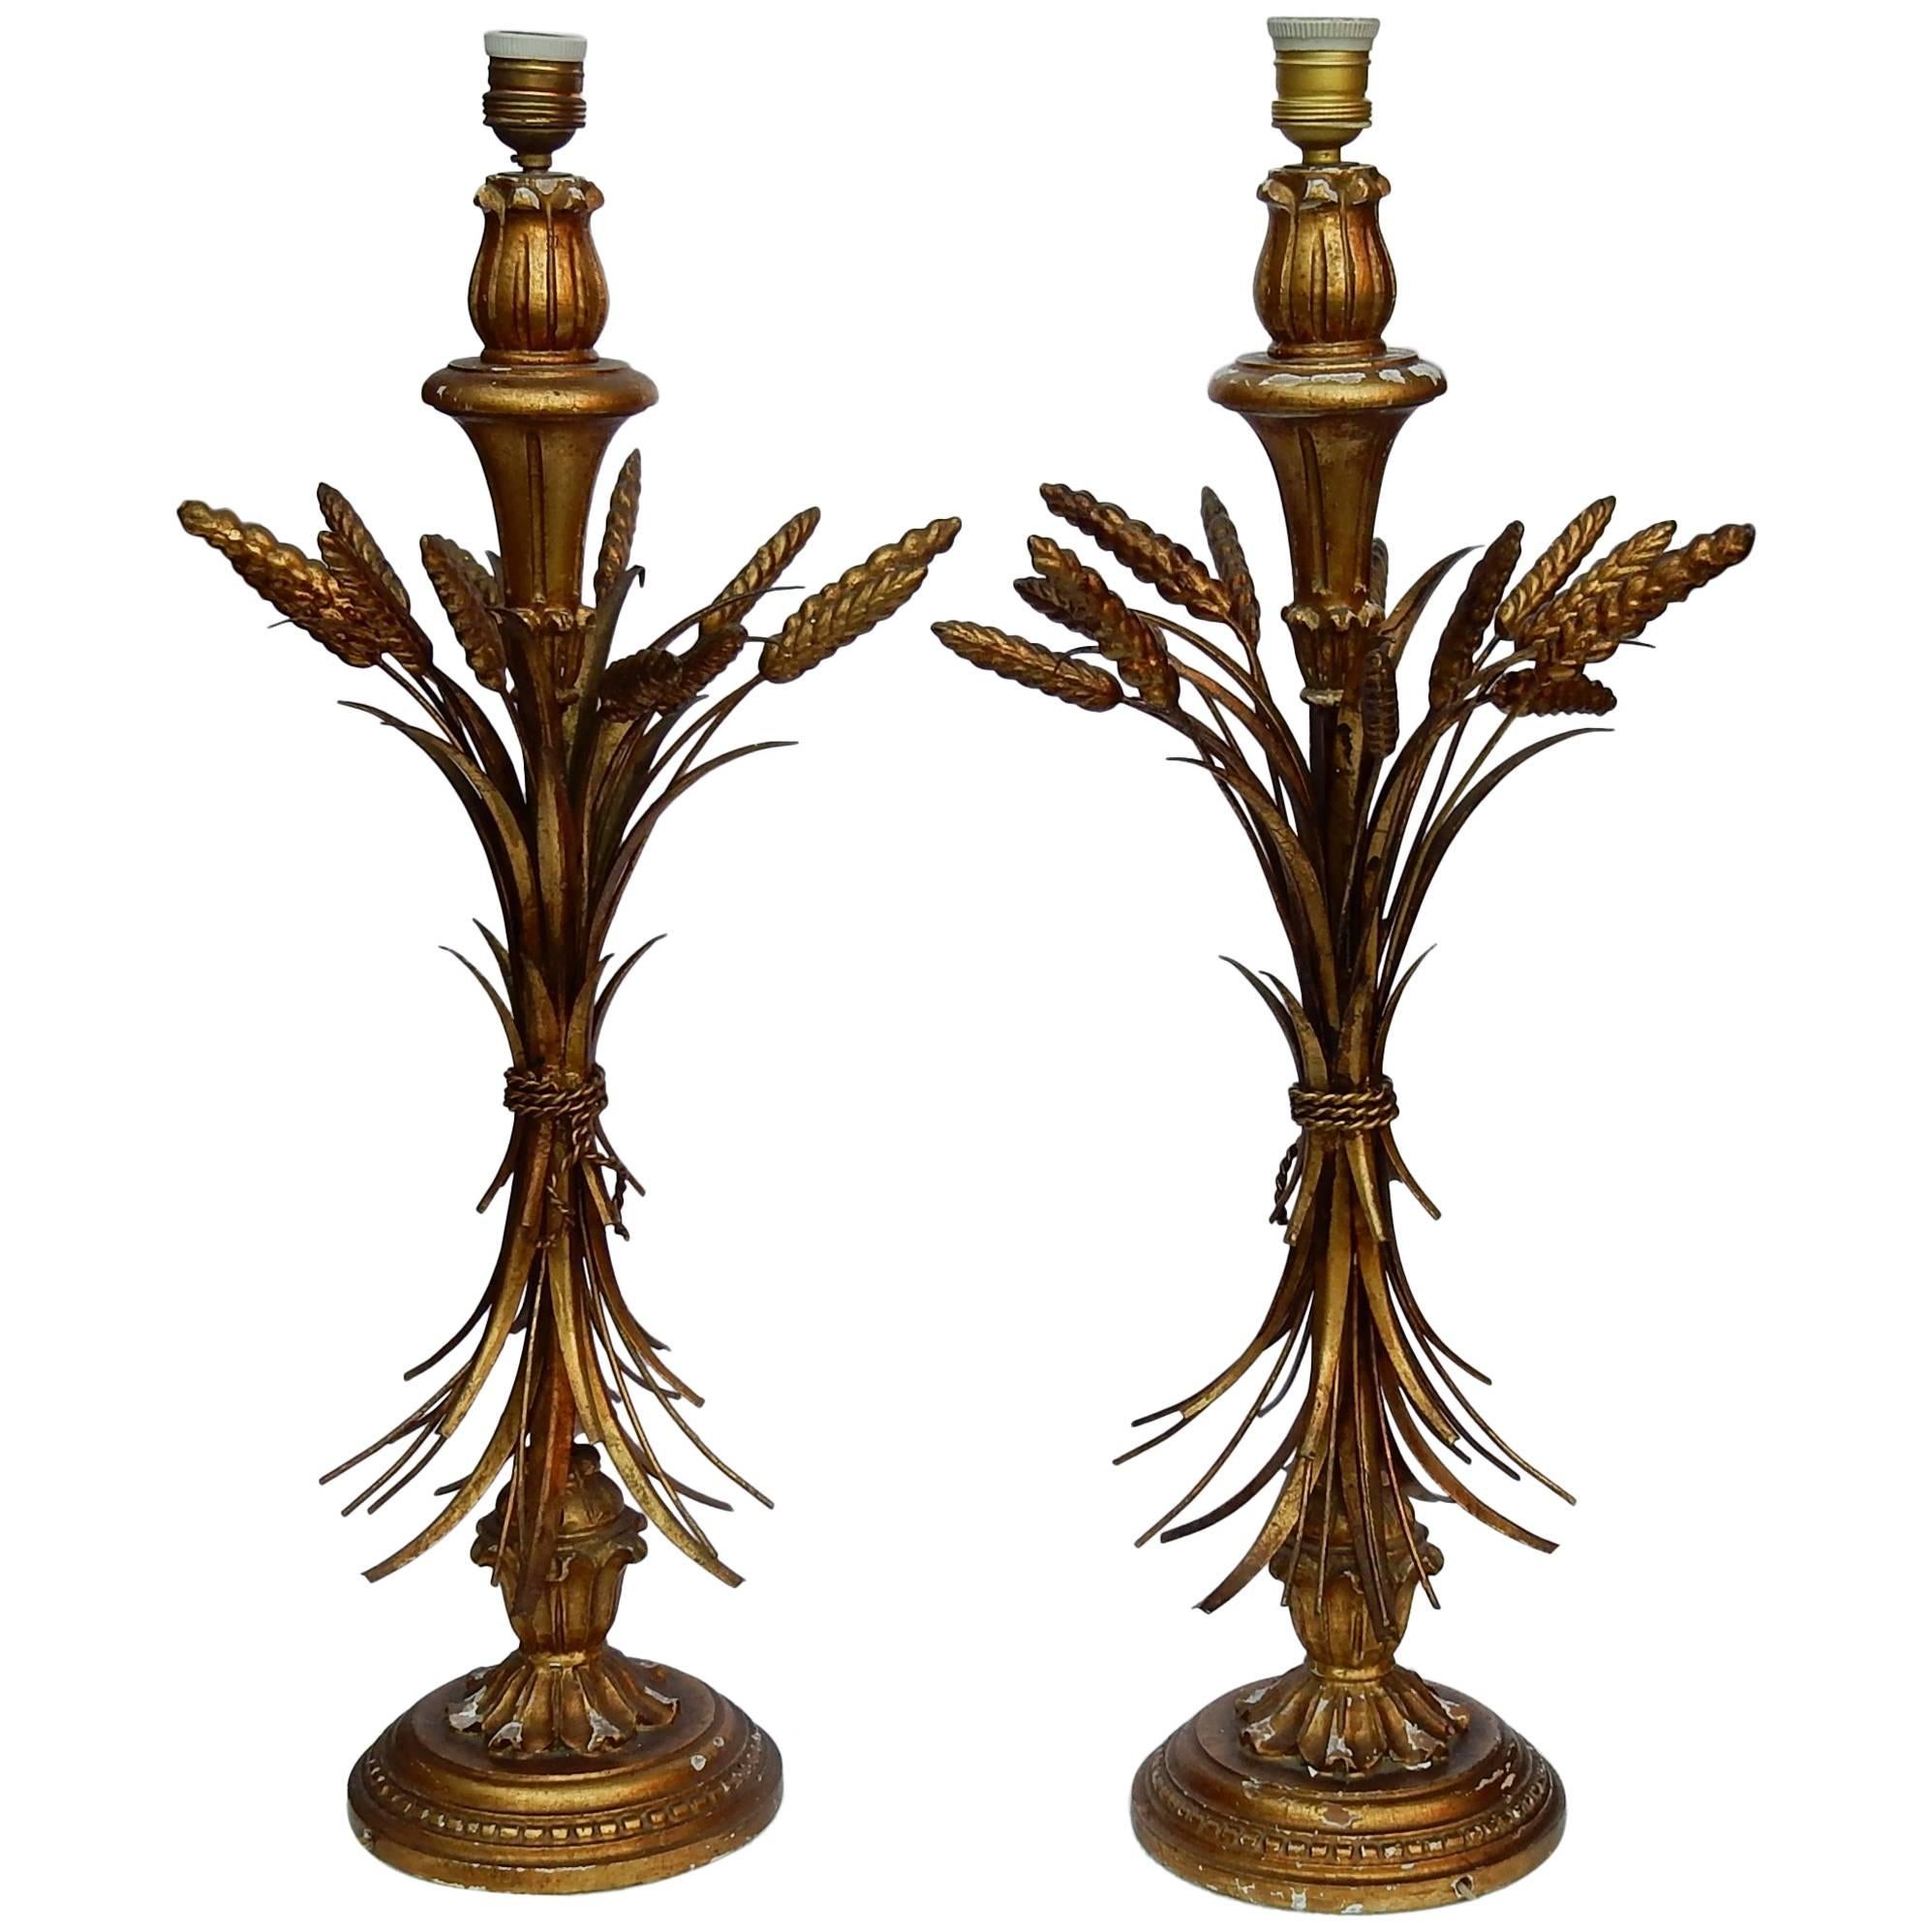 1950-1970 Pair of Golden Wood Lamps with Sheaf of Wheat